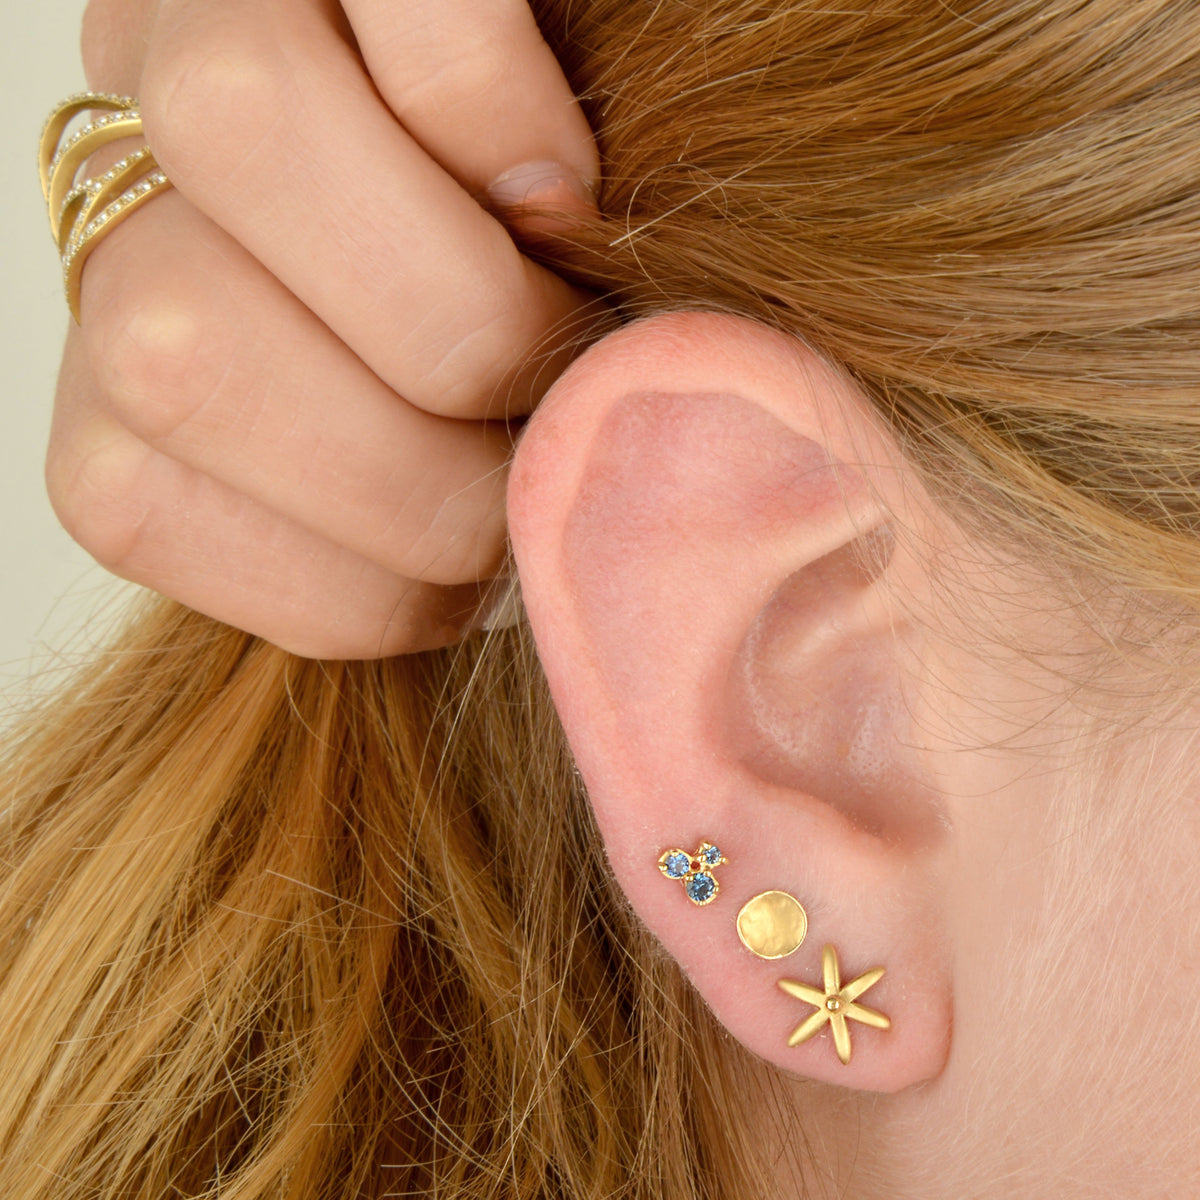 18k yellow gold hammered disc stud earrings